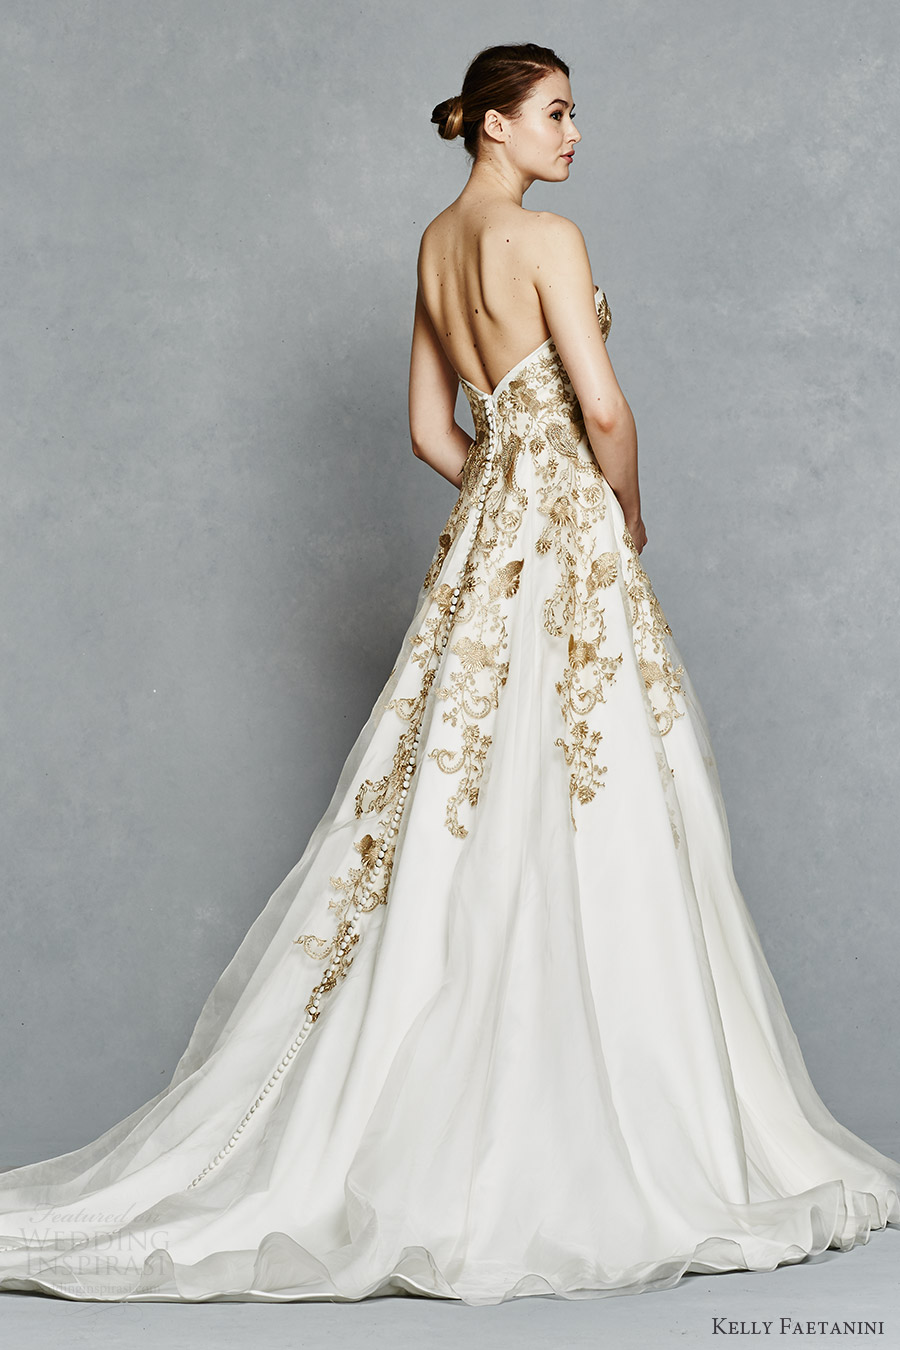 kelly faetanini bridal spring 2017 strapless sweetheart ball gown wedding dress (leona) sv gold color embroidery pockets